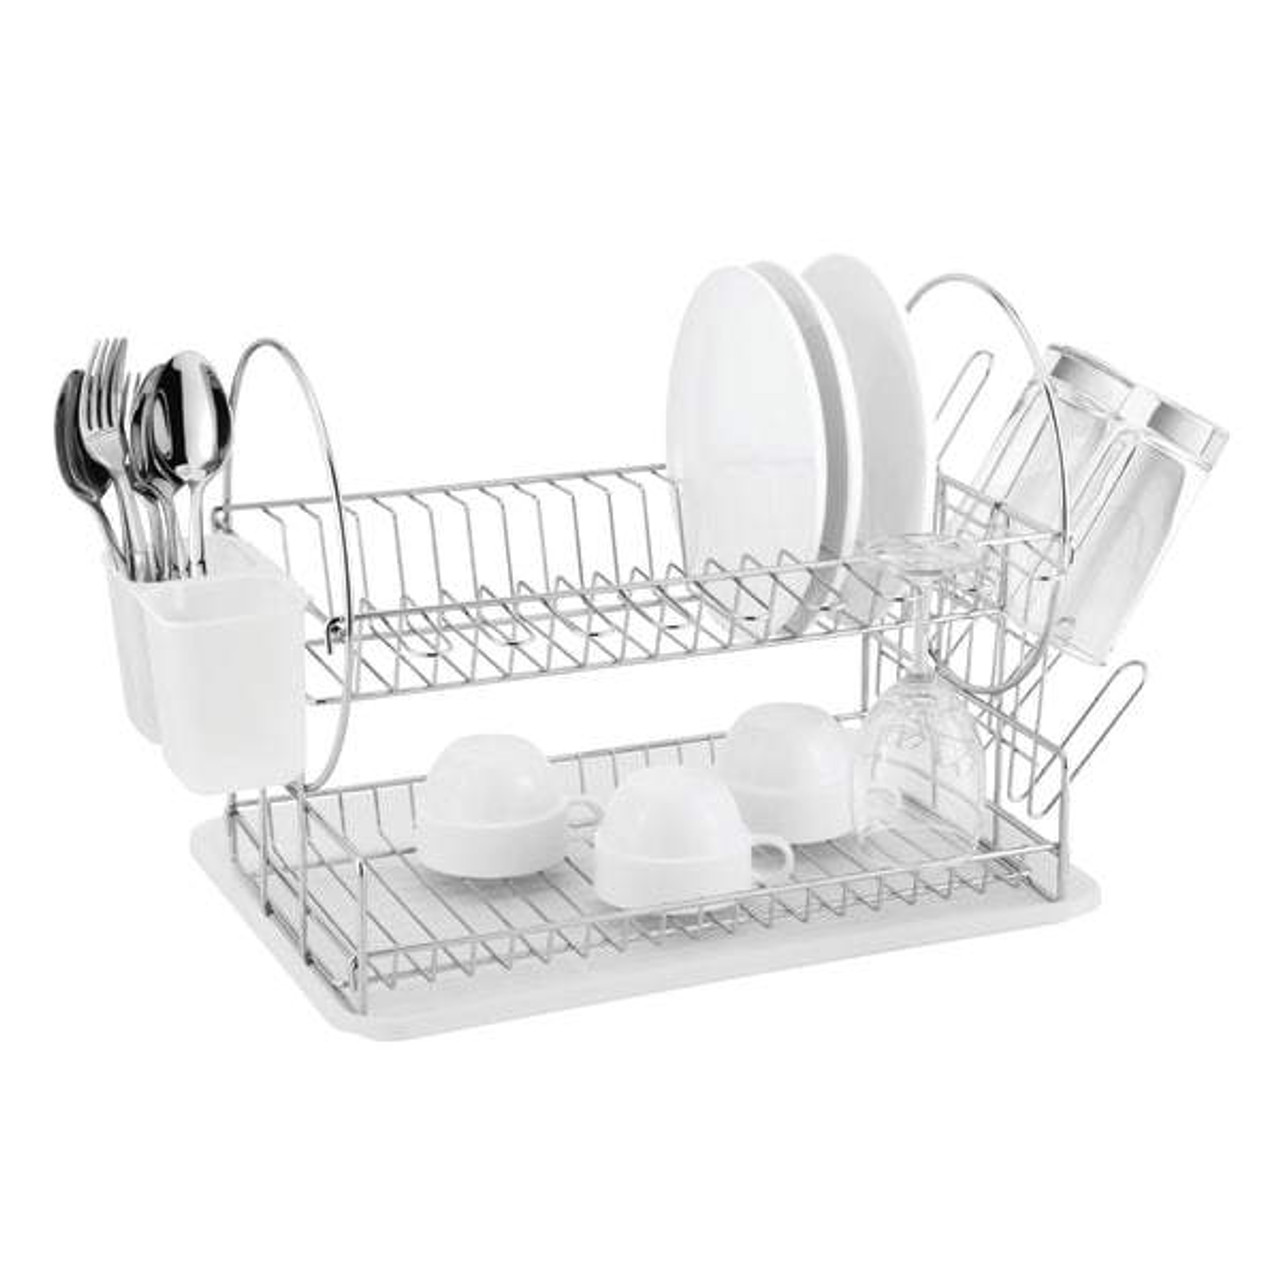 https://cdn11.bigcommerce.com/s-yvpirc28f4/images/stencil/1280x1280/products/49053/102426/2-tier-dish-drying-rack-snatcher-online-shopping-south-africa-20064739164319__24324.1629287970.jpg?c=1&imbypass=on